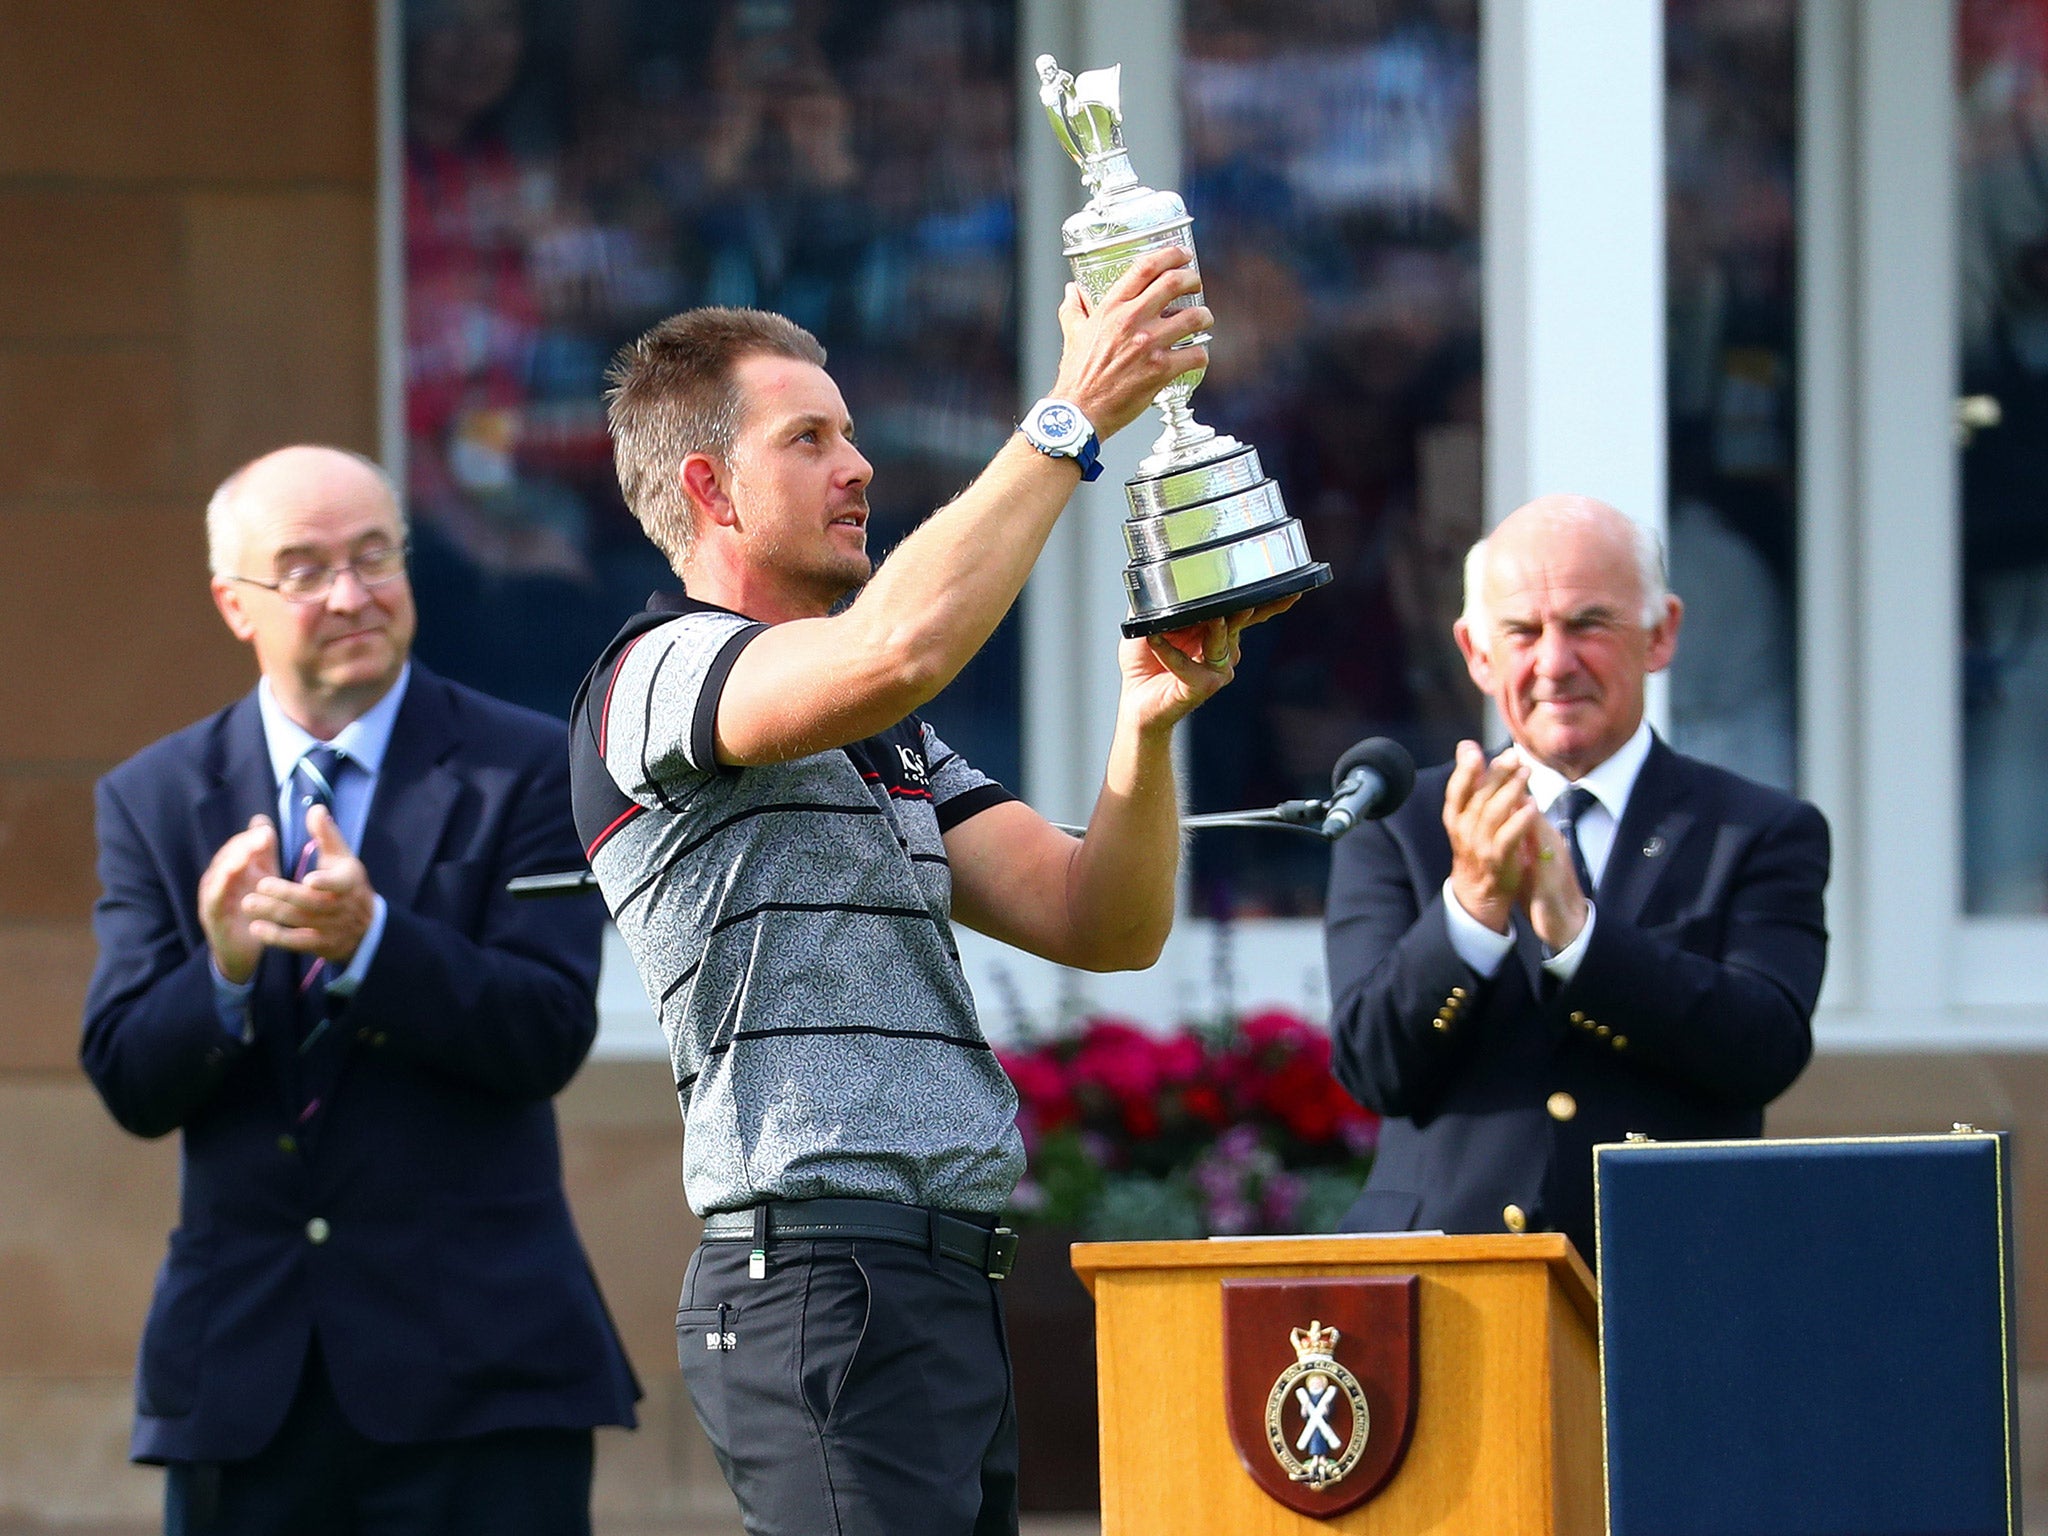 Henrik Stenson poses with the Claret Jug after winning The Open at Royal Troon